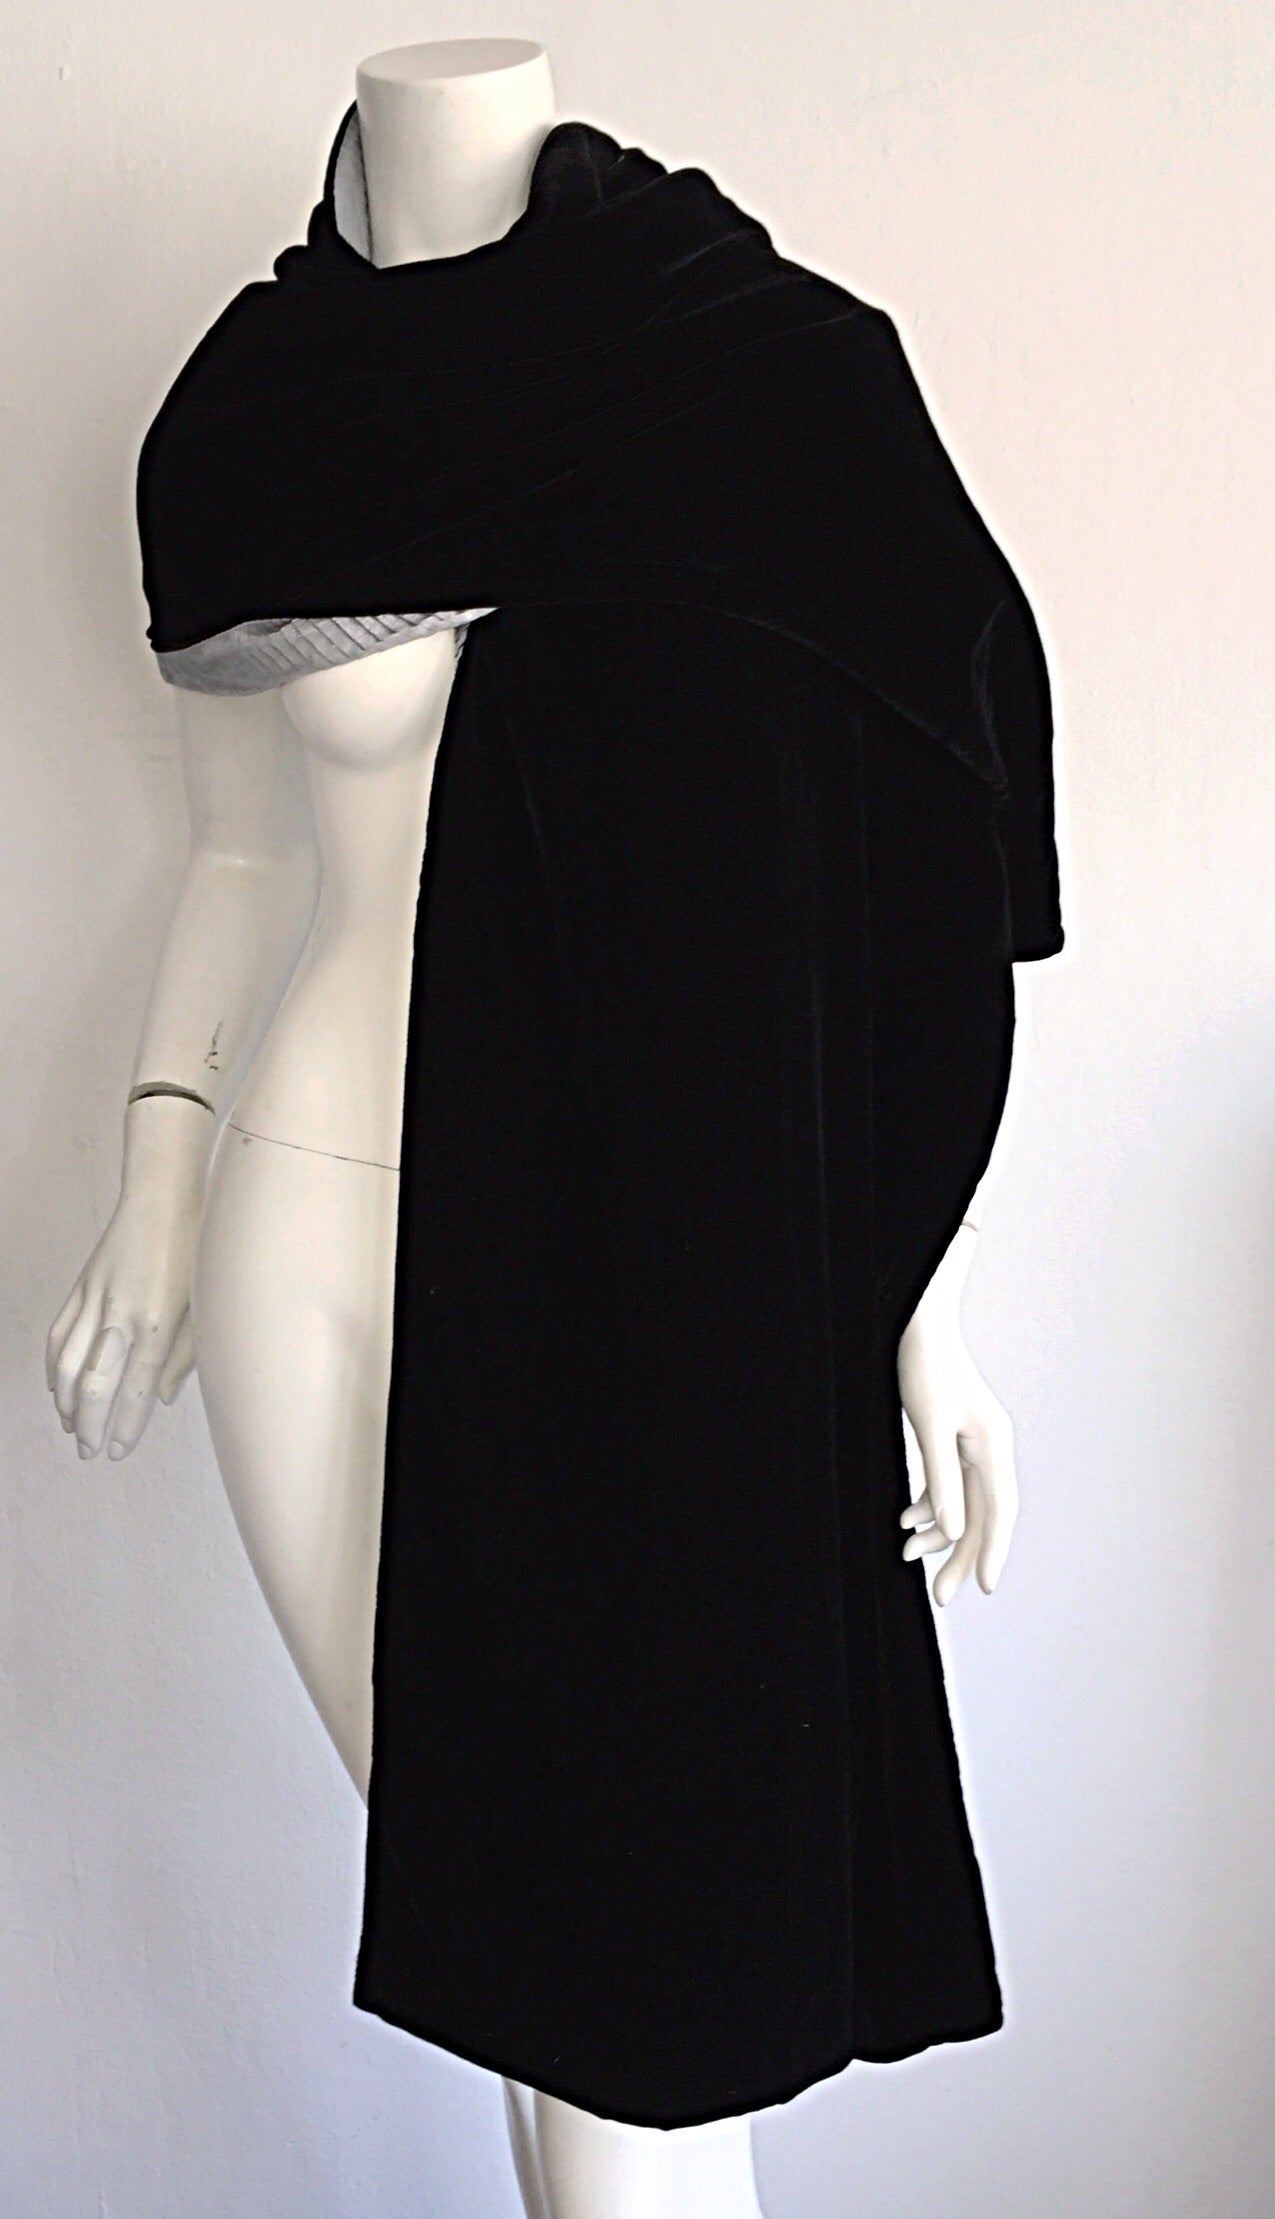 Stunning 1940s black silk velvet opera shawl! Luxurious black silk velvet, with a subtle silver accordion backing. Huge size, which is not only stylish, but extremely comfortable! Can easily be dressed up or down. In great